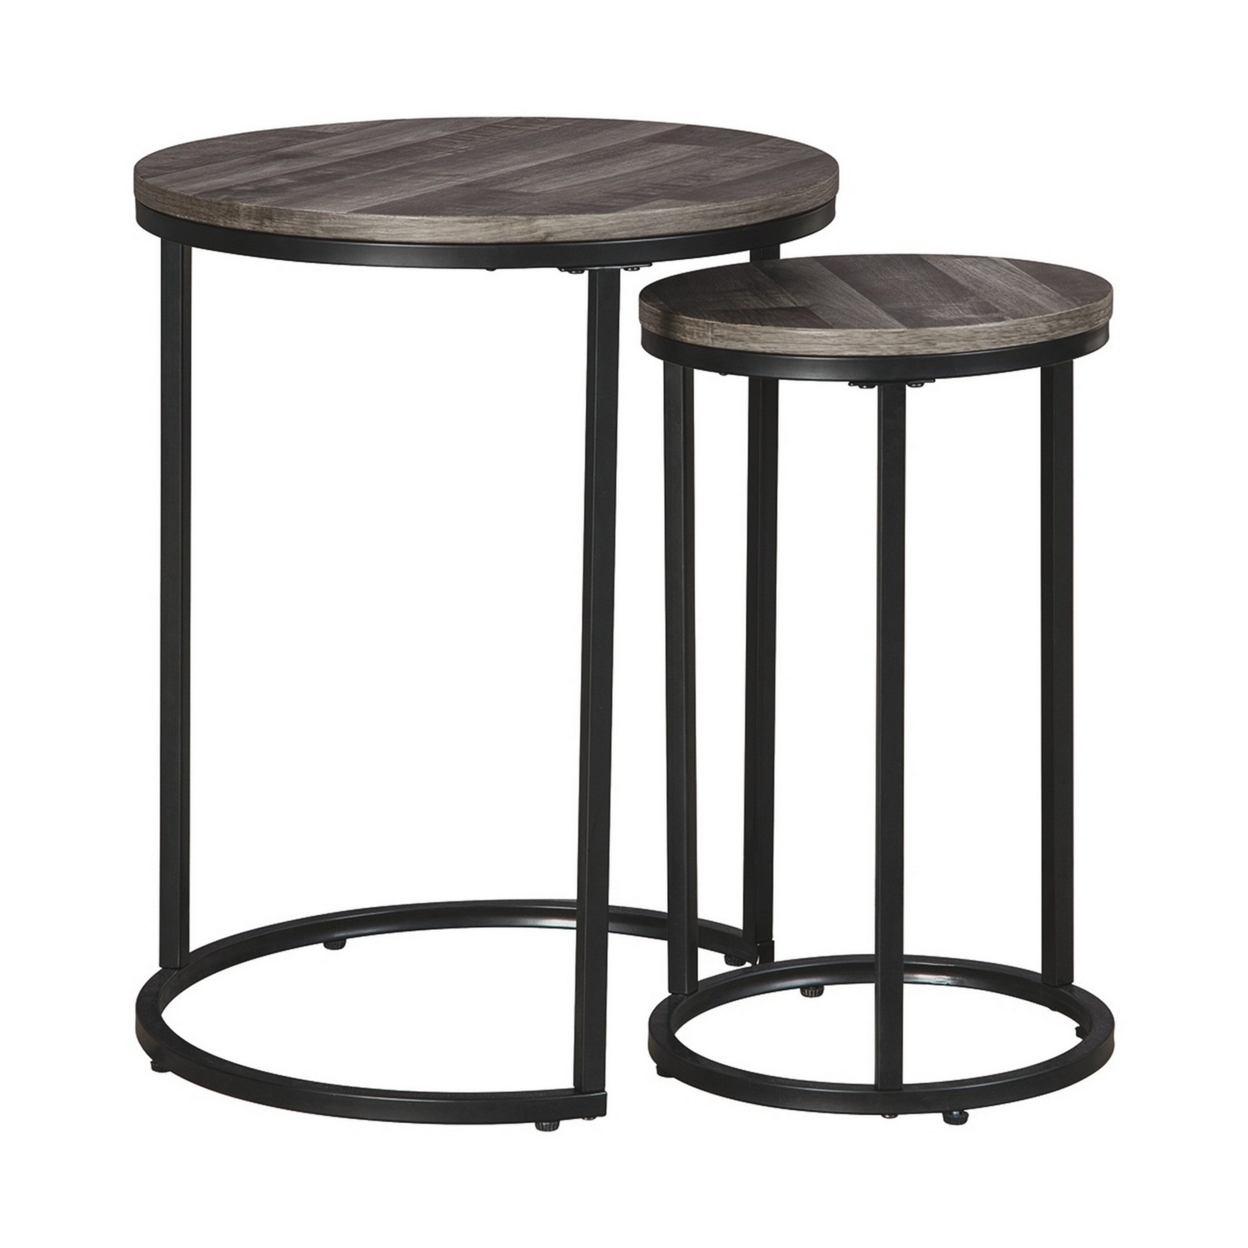 Round Wooden Top Metal Accent Table, Set Of 2, Gray And Black- Saltoro Sherpi